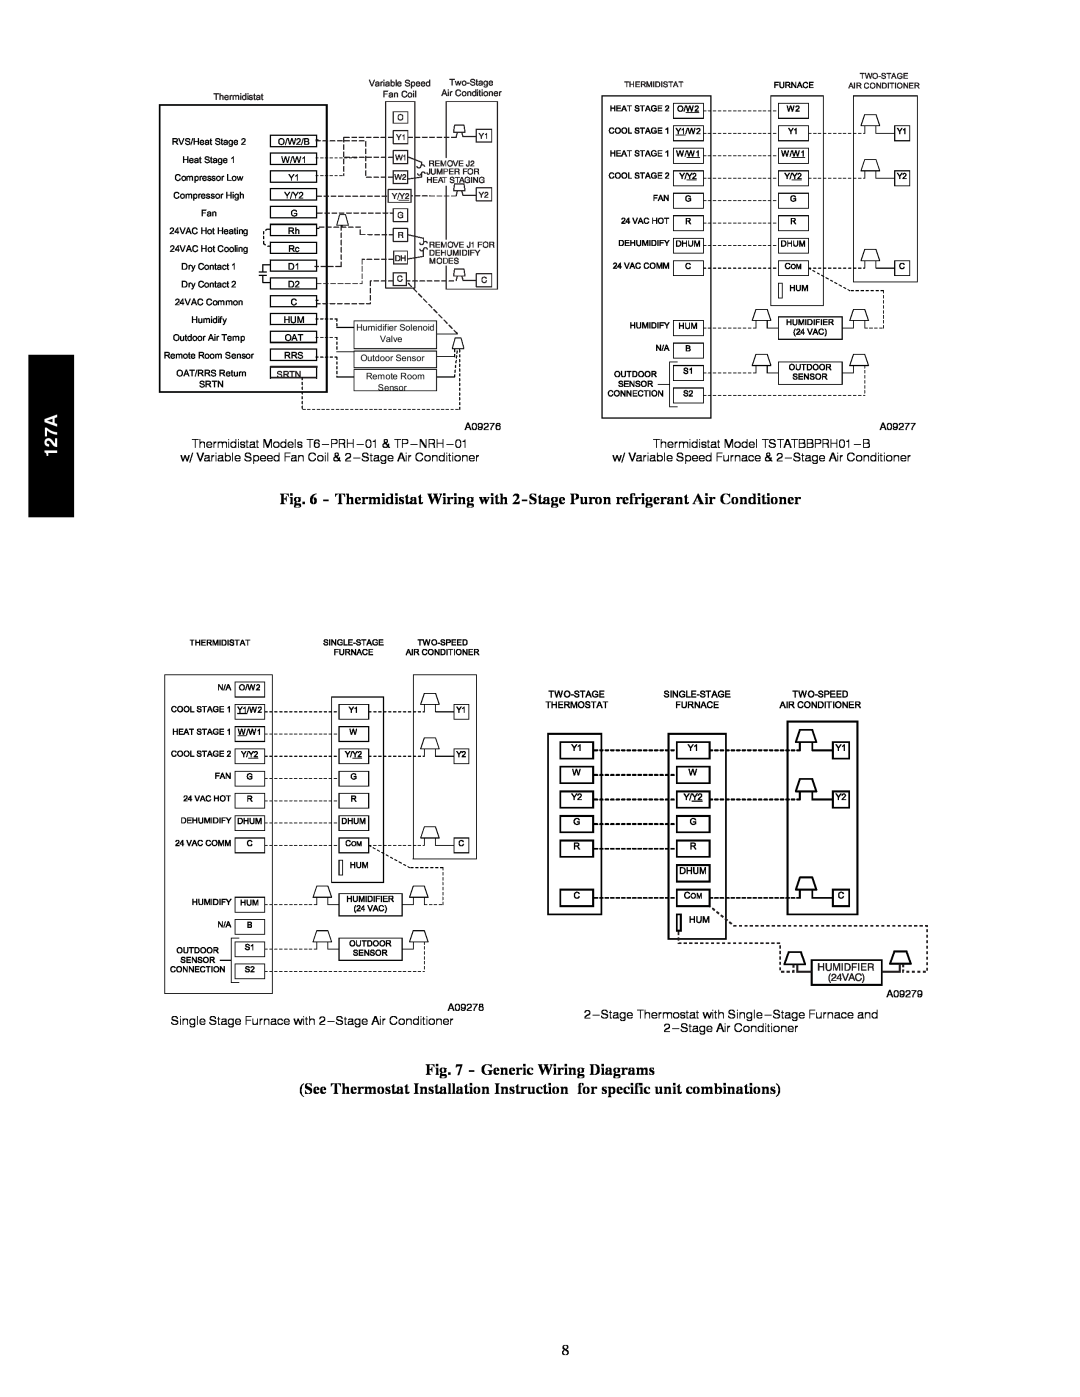 Bryant 127A Generic Wiring Diagrams, A09276, A09277, Thermidistat Models T6---PRH, w/ Variable Speed Fan Coil, A09278 